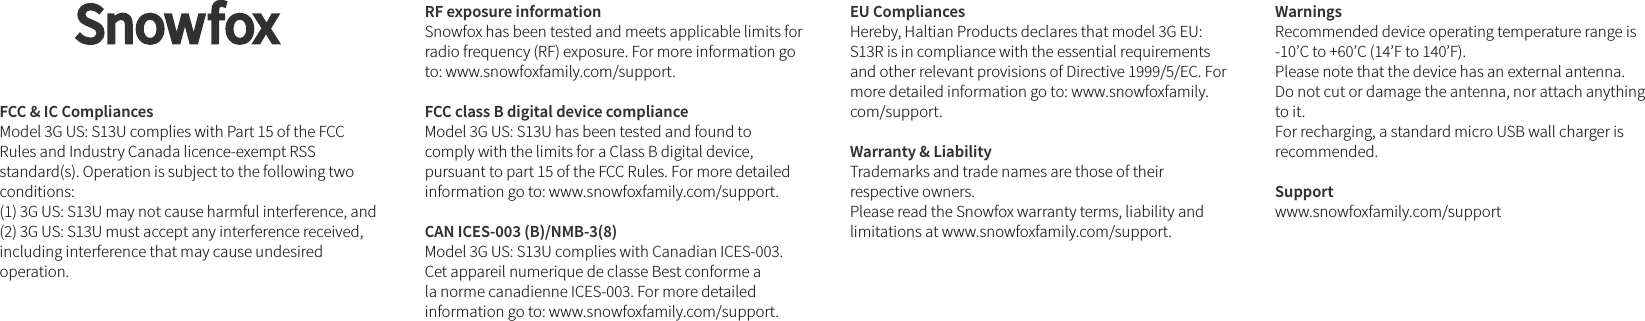 FCC &amp; IC Compliances Model 3G US: S13U complies with Part 15 of the FCC Rules and Industry Canada licence-exempt RSS standard(s). Operation is subject to the following two conditions:(1) 3G US: S13U may not cause harmful interference, and (2) 3G US: S13U must accept any interference received, including interference that may cause undesired operation.RF exposure information Snowfox has been tested and meets applicable limits for radio frequency (RF) exposure. For more information go to: www.snowfoxfamily.com/support.FCC class B digital device compliance Model 3G US: S13U has been tested and found to comply with the limits for a Class B digital device, pursuant to part 15 of the FCC Rules. For more detailed information go to: www.snowfoxfamily.com/support. CAN ICES-003 (B)/NMB-3(8) Model 3G US: S13U complies with Canadian ICES-003. Cet appareil numerique de classe Best conforme a la norme canadienne ICES-003. For more detailed information go to: www.snowfoxfamily.com/support.EU Compliances Hereby, Haltian Products declares that model 3G EU: S13R is in compliance with the essential requirements and other relevant provisions of Directive 1999/5/EC. For more detailed information go to: www.snowfoxfamily.com/support. Warranty &amp; Liability Trademarks and trade names are those of their respective owners. Please read the Snowfox warranty terms, liability and limitations at www.snowfoxfamily.com/support.Warnings Recommended device operating temperature range is -10’C to +60’C (14’F to 140’F). Please note that the device has an external antenna. Do not cut or damage the antenna, nor attach anything to it. For recharging, a standard micro USB wall charger is recommended.Support www.snowfoxfamily.com/support